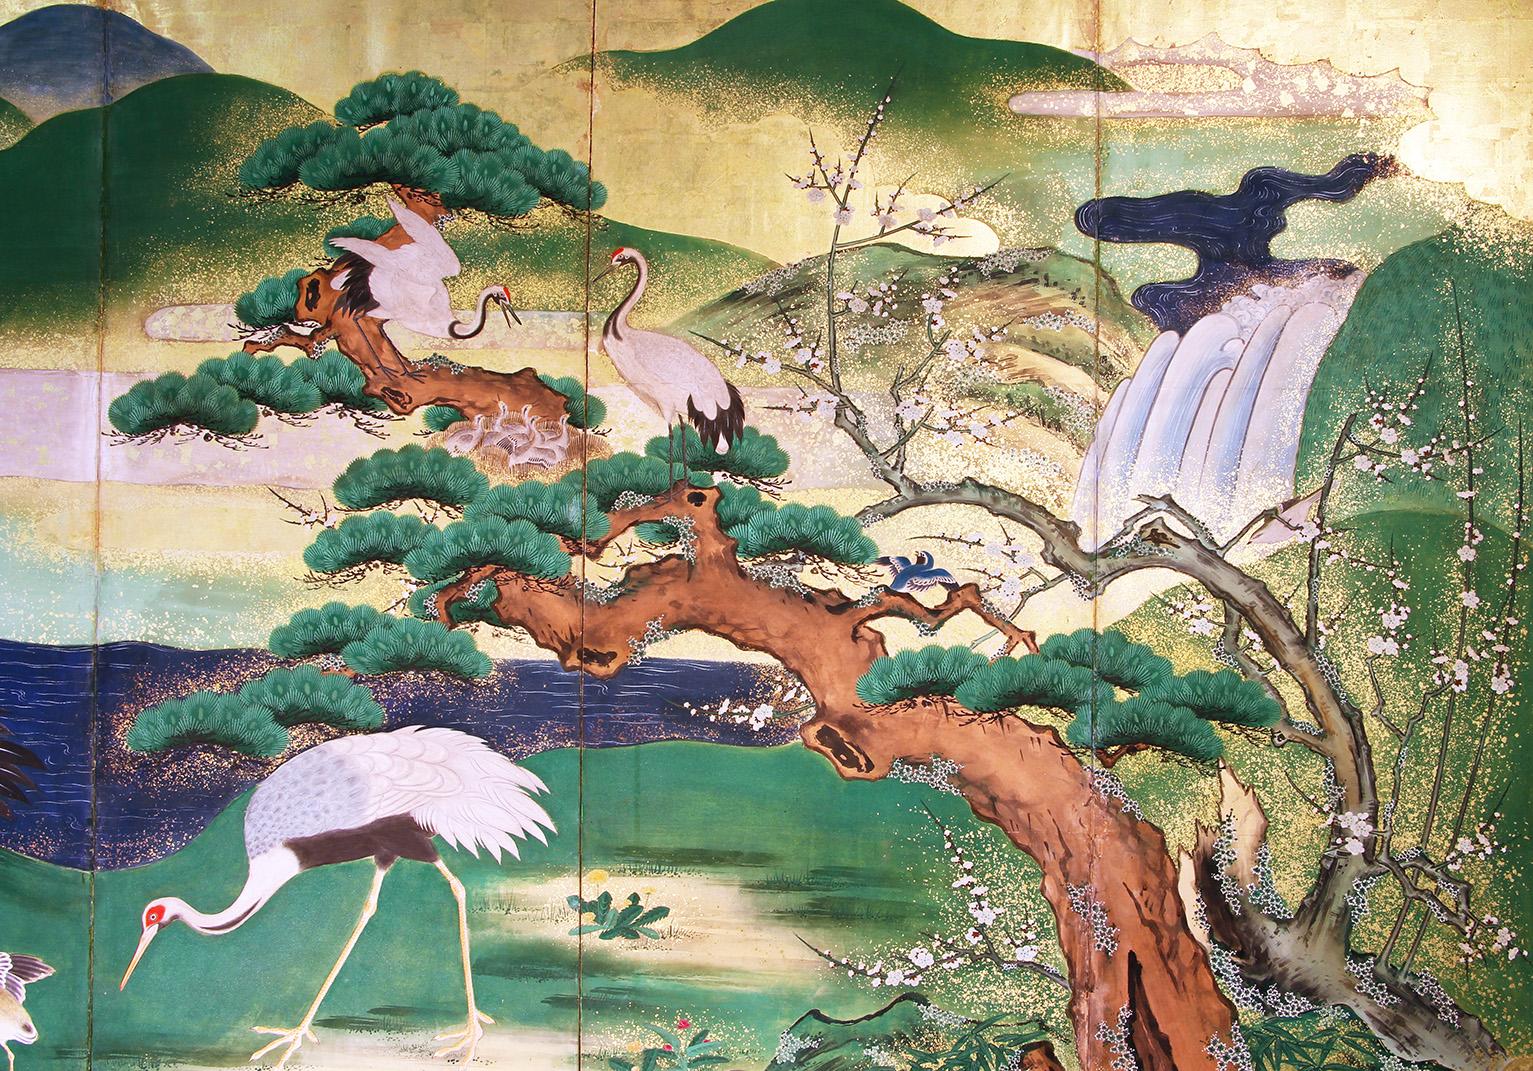 This Japanese screen is a beautiful example of a landscape with pine trees, peonies, birds and cranes in the water, it releases a pleasant feeling of harmony in nature.
The work is from the end of the 18th century, full Edo period, the artist is